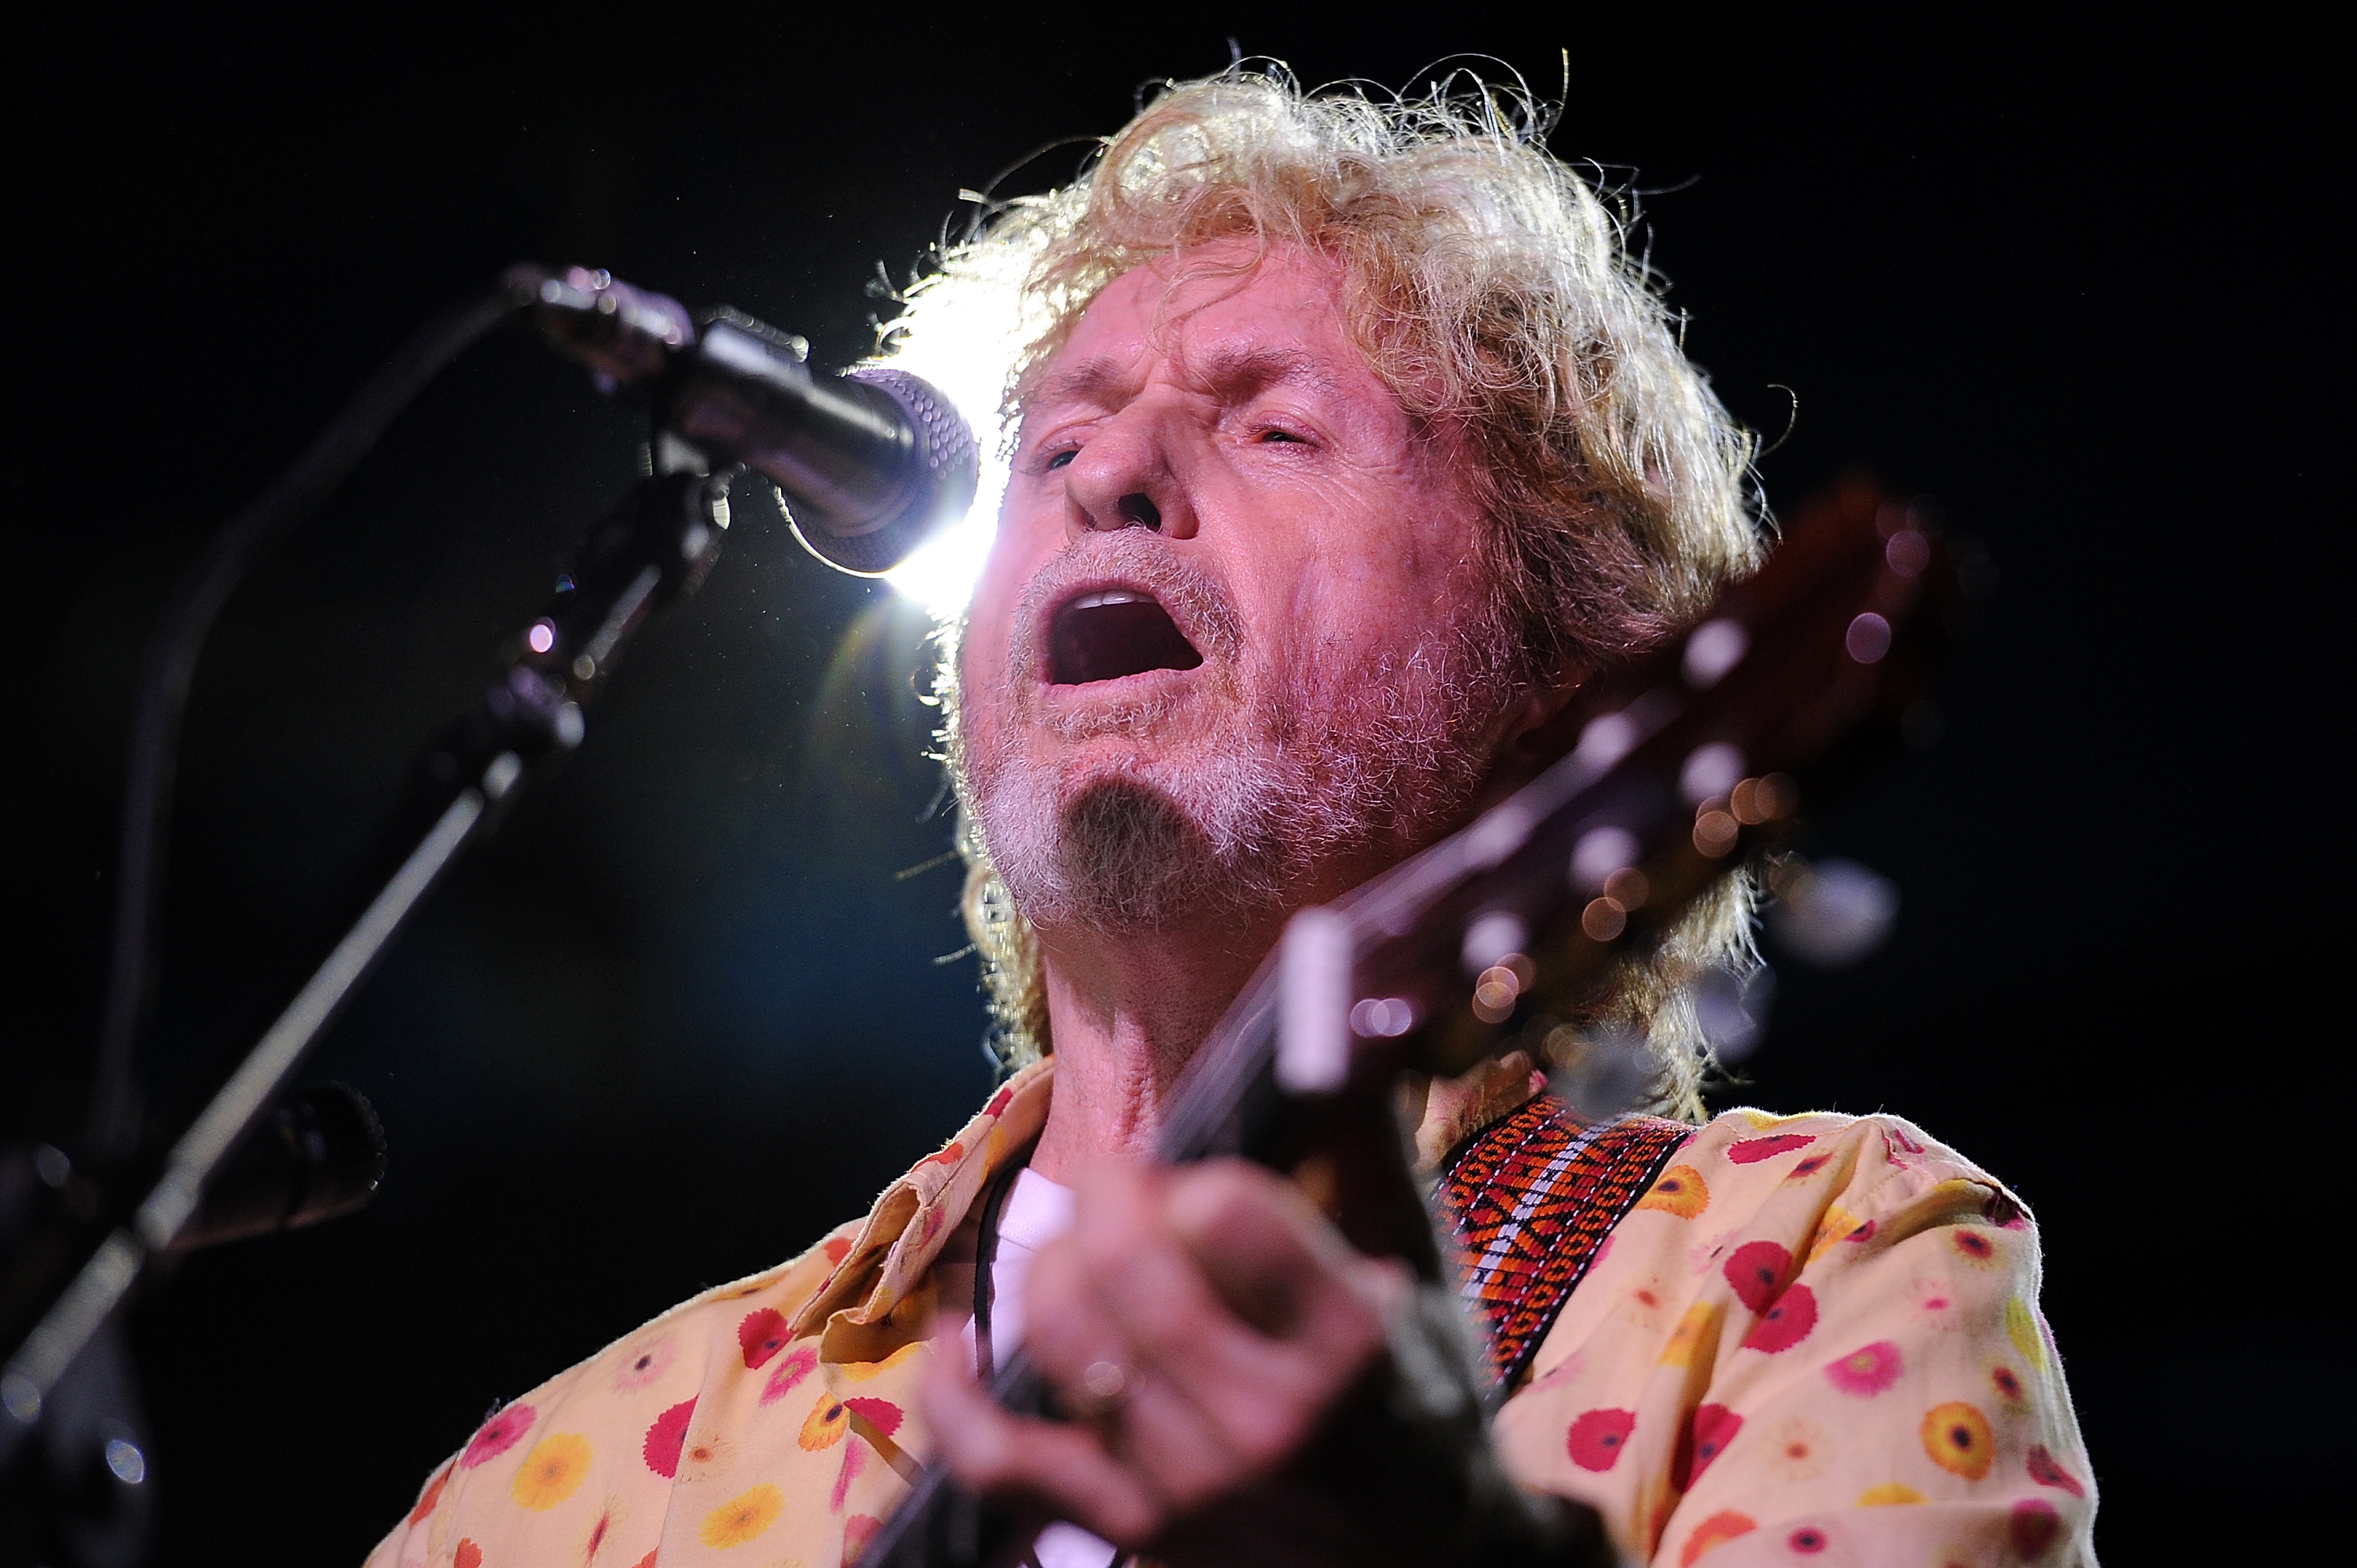 BYRON BAY, AUSTRALIA - MARCH 31:  Jon Anderson performs on stage at Bluesfest 2013 - Day 4 on March 31, 2013 in Byron Bay, Australia.  (Photo by Matt Roberts/Getty Images)